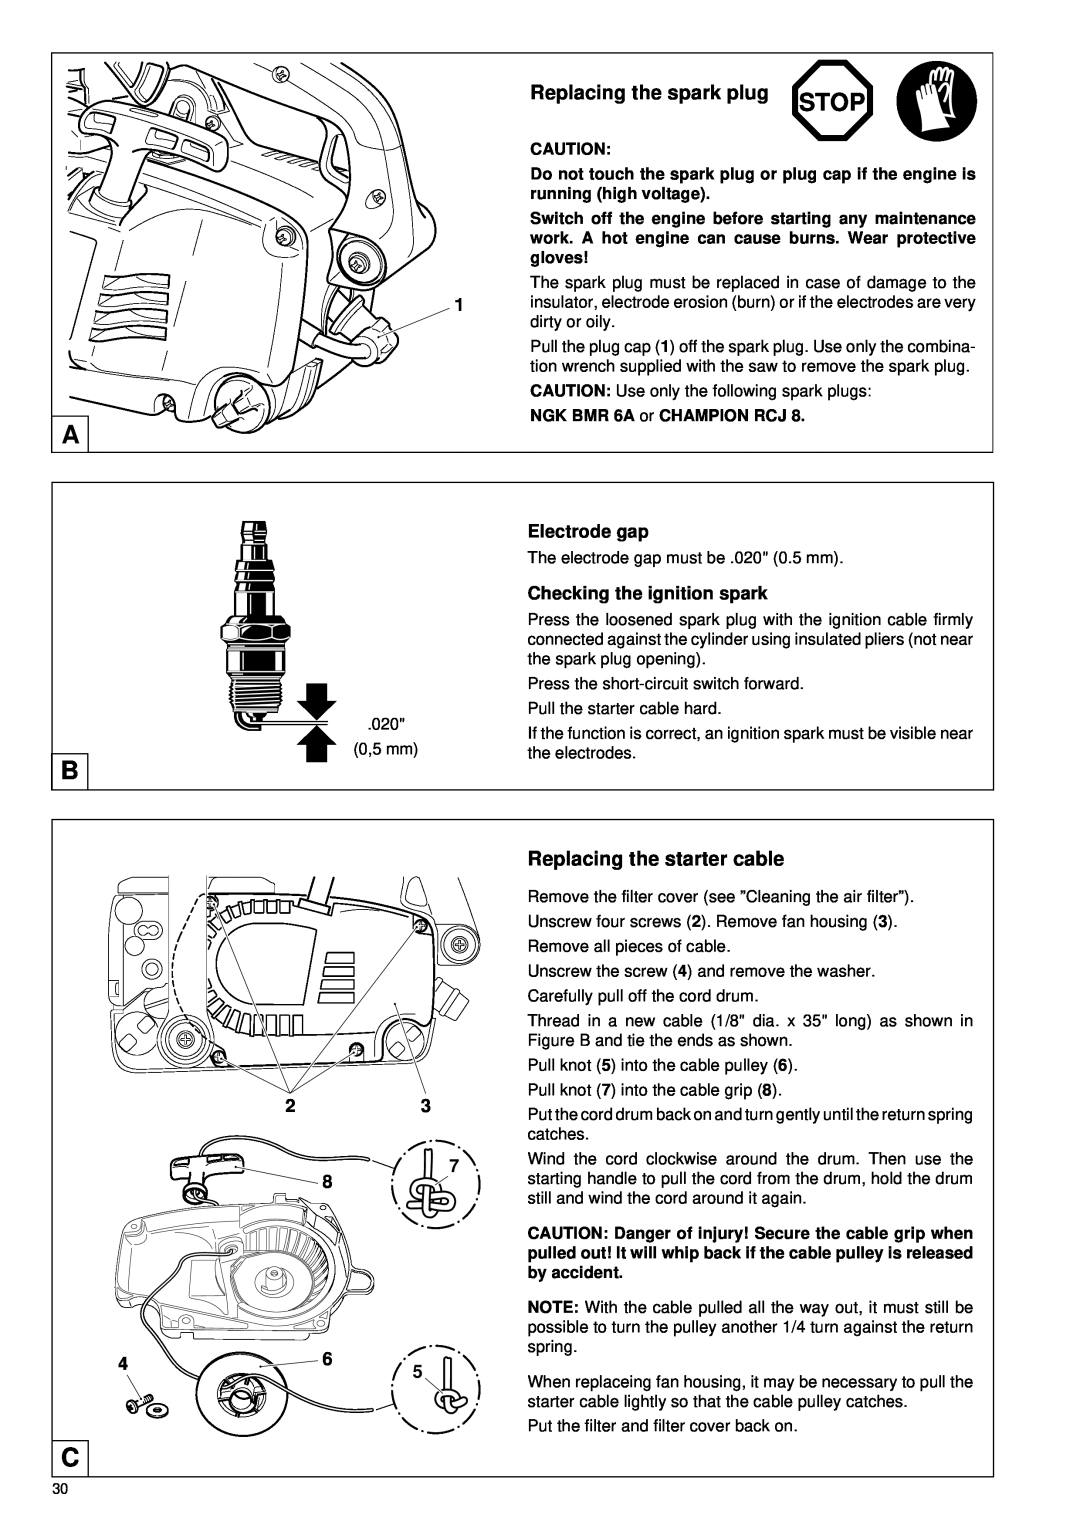 Makita DCS 330 TH instruction manual Replacing the spark plug, Replacing the starter cable, Stop 